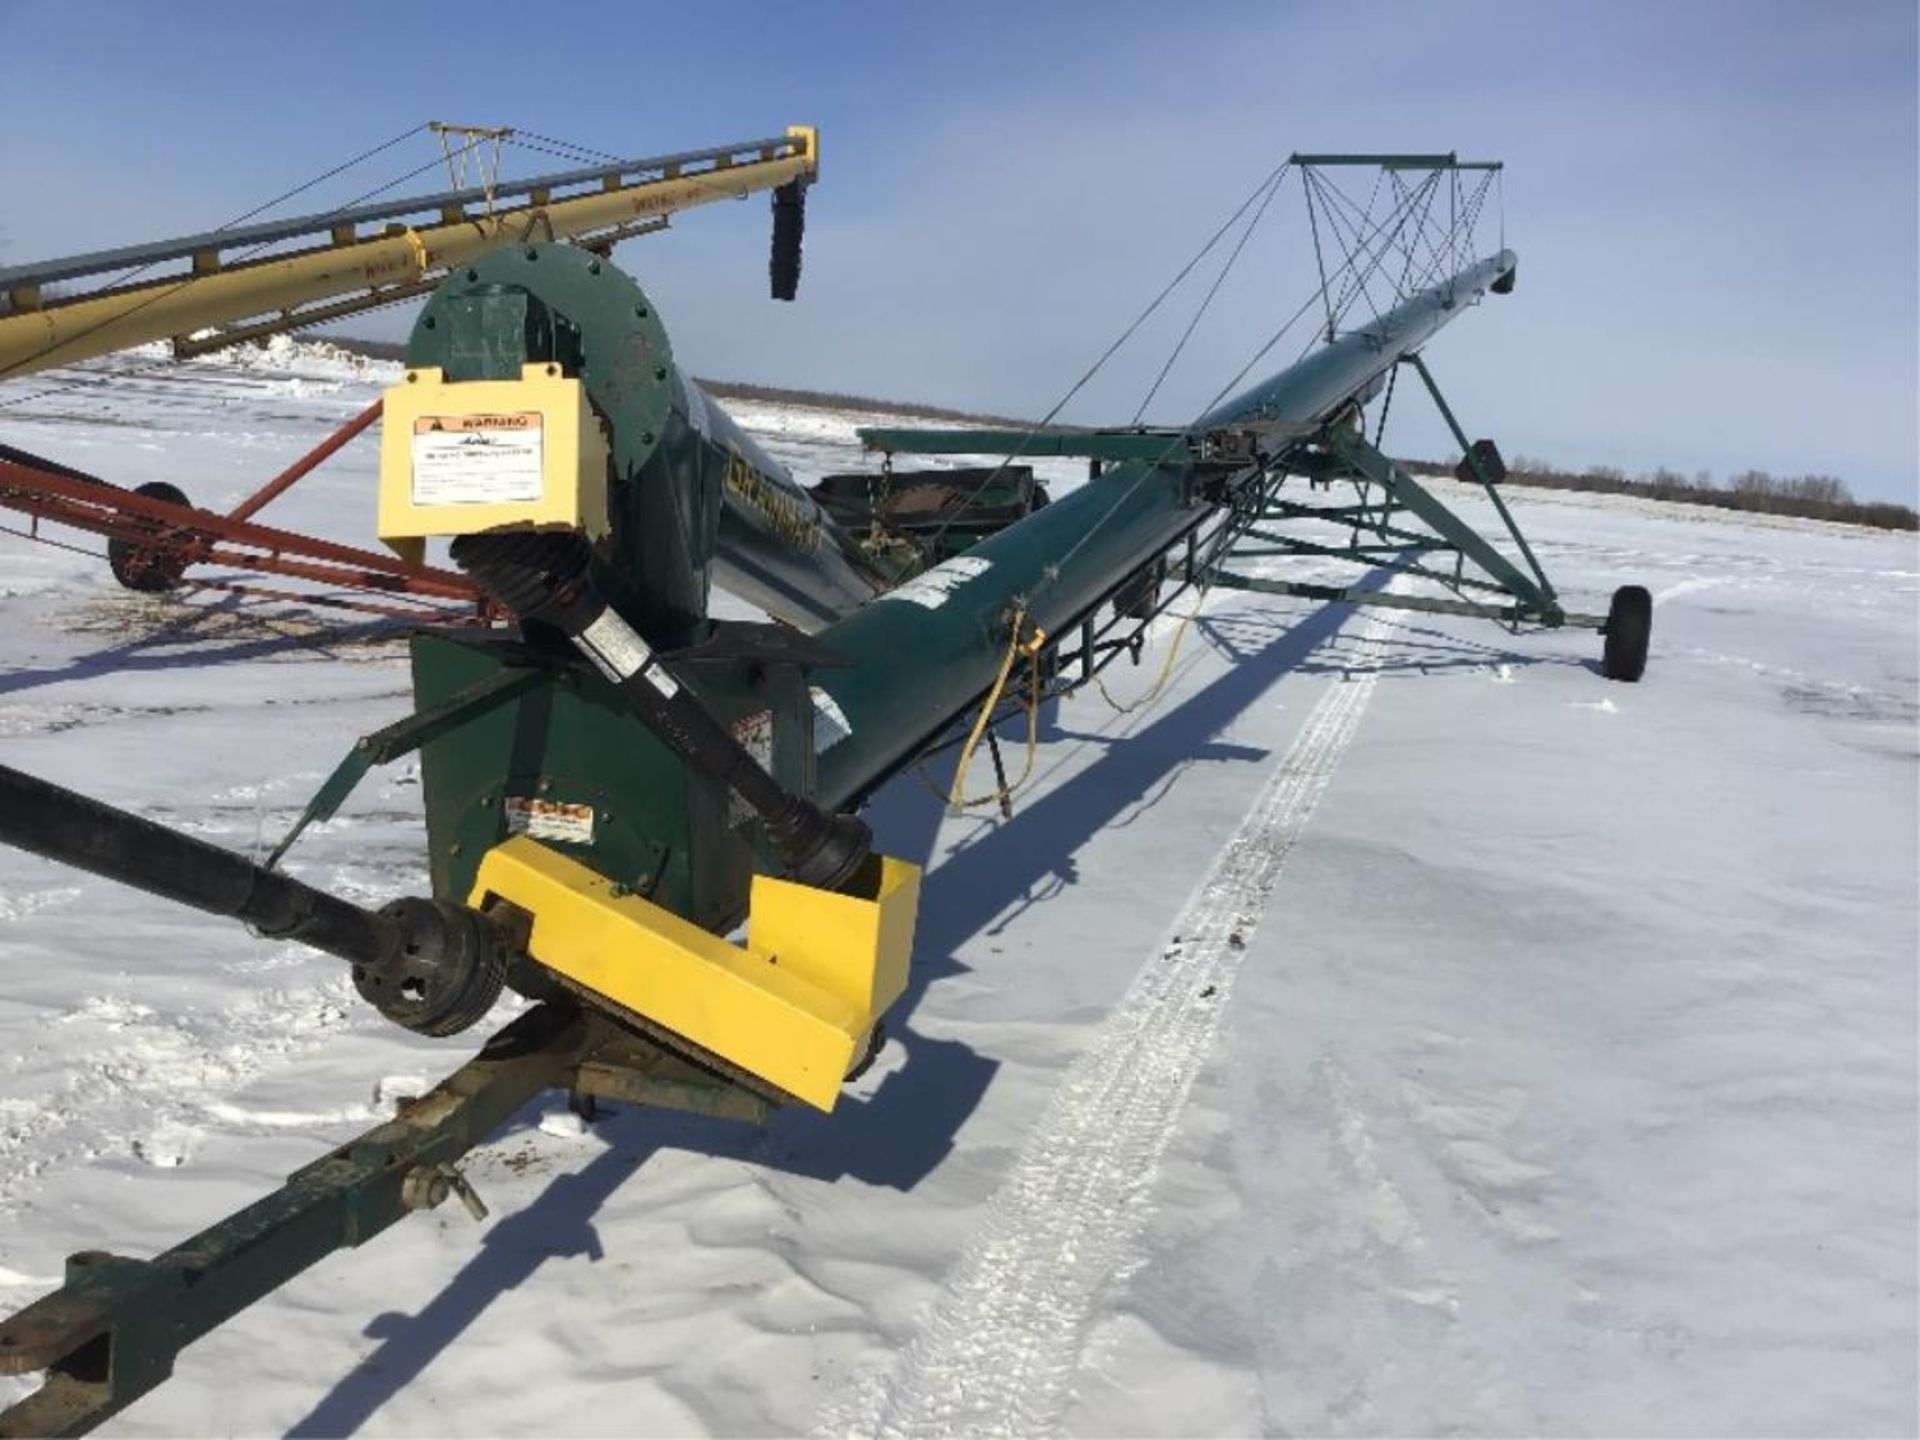 86 Grain Maxx 4385 13in X 85Ft Swing Auger s/n 213 540PTO, Elec Drive Swing Auger Lift - Image 2 of 10